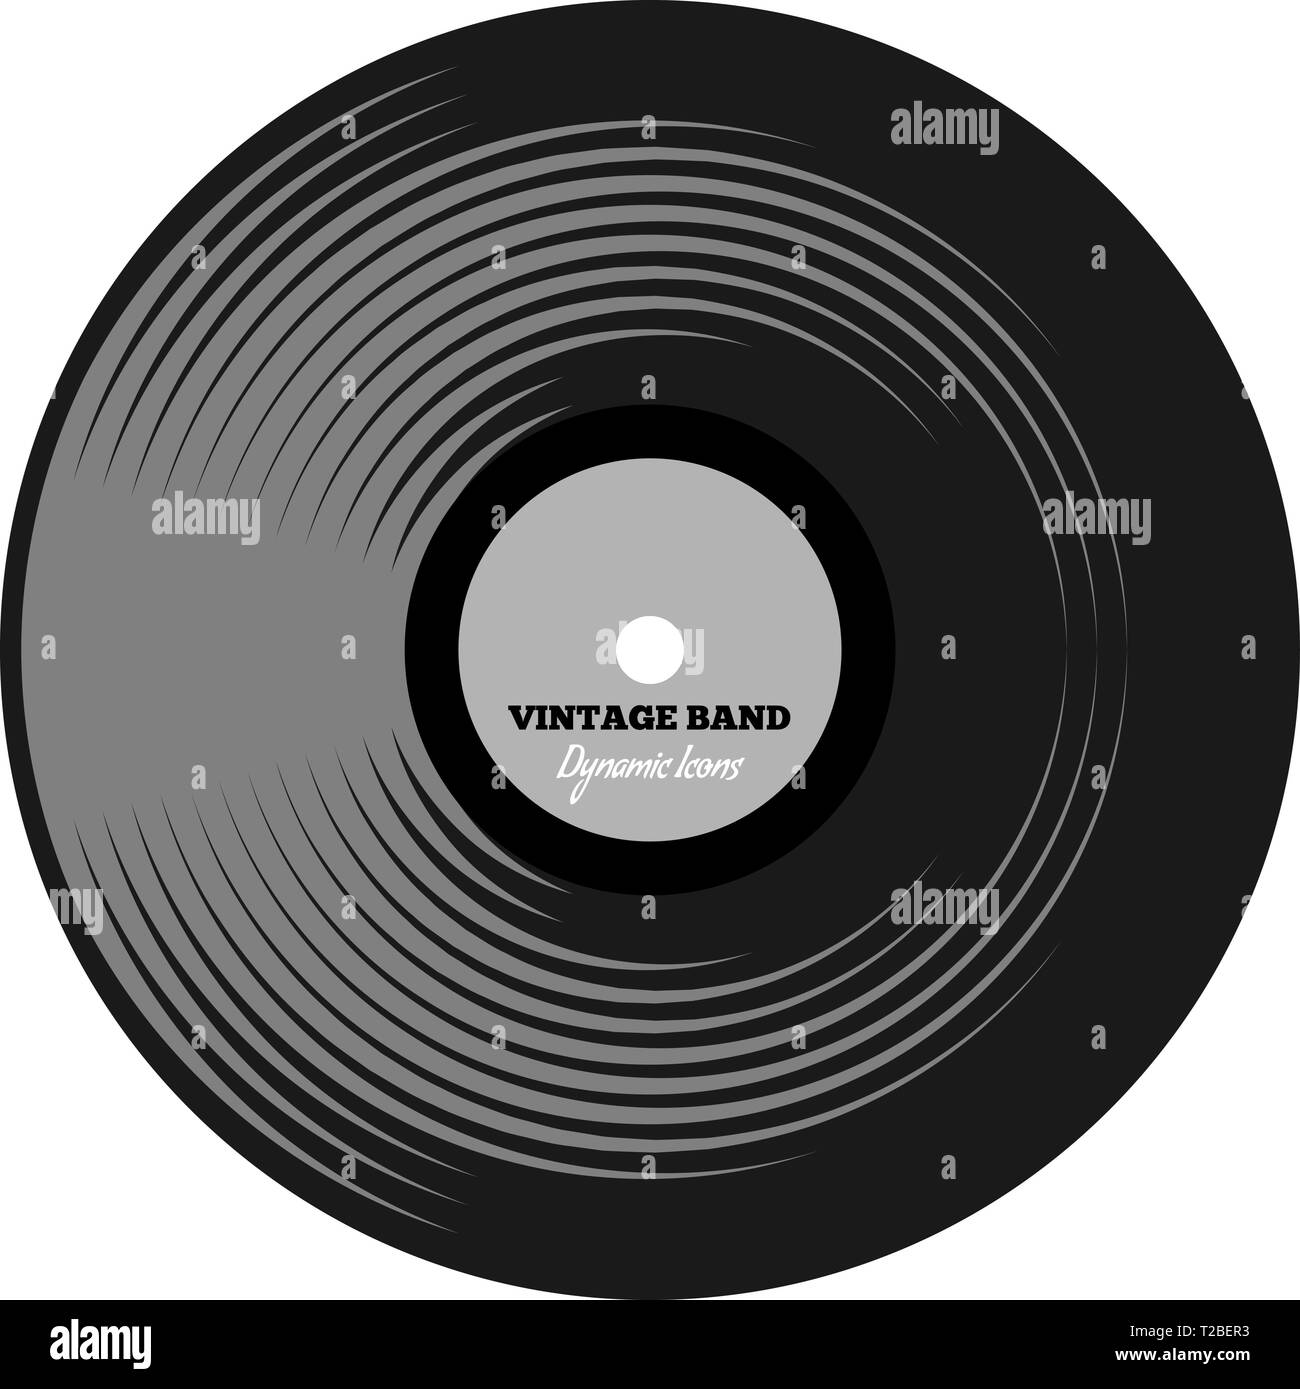 Vinyl long play record with cartoon or flat color style. Symbol or logo concept design. Vector illustration. Stock Vector